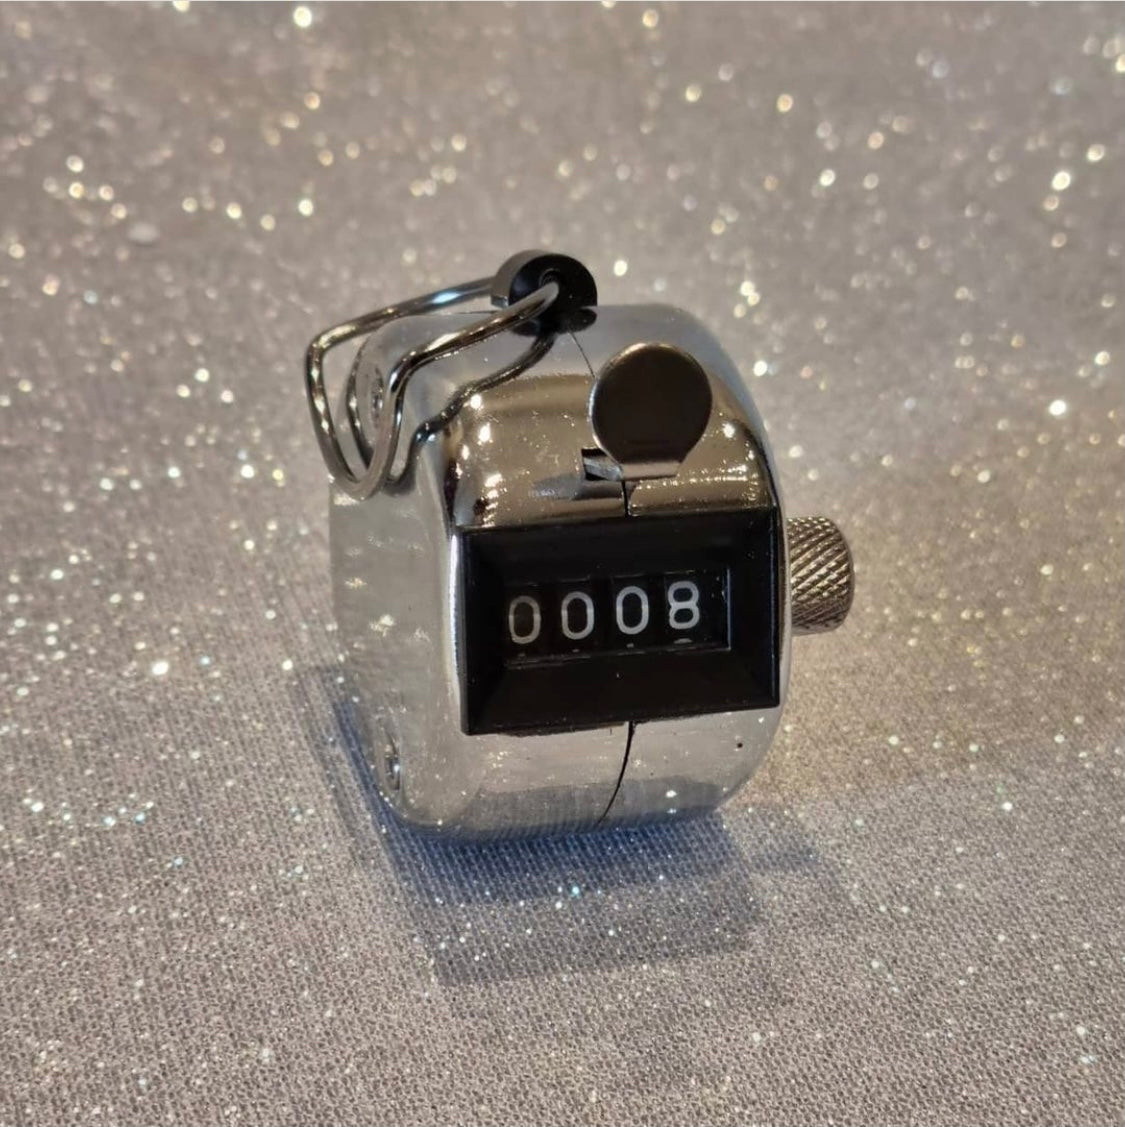 I-Silver Metal Tally Counter 